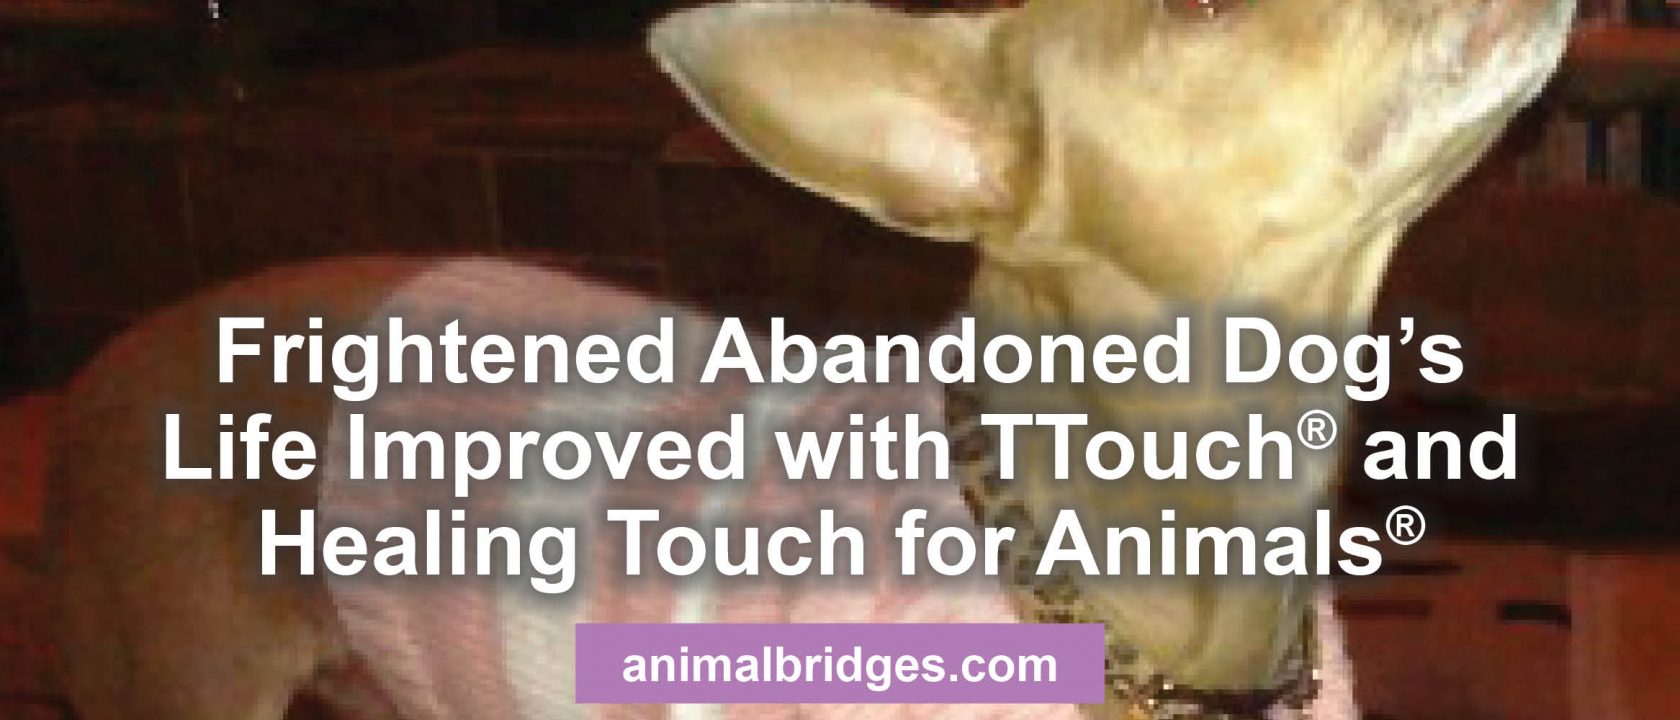 Ttouch Healing touch for animals